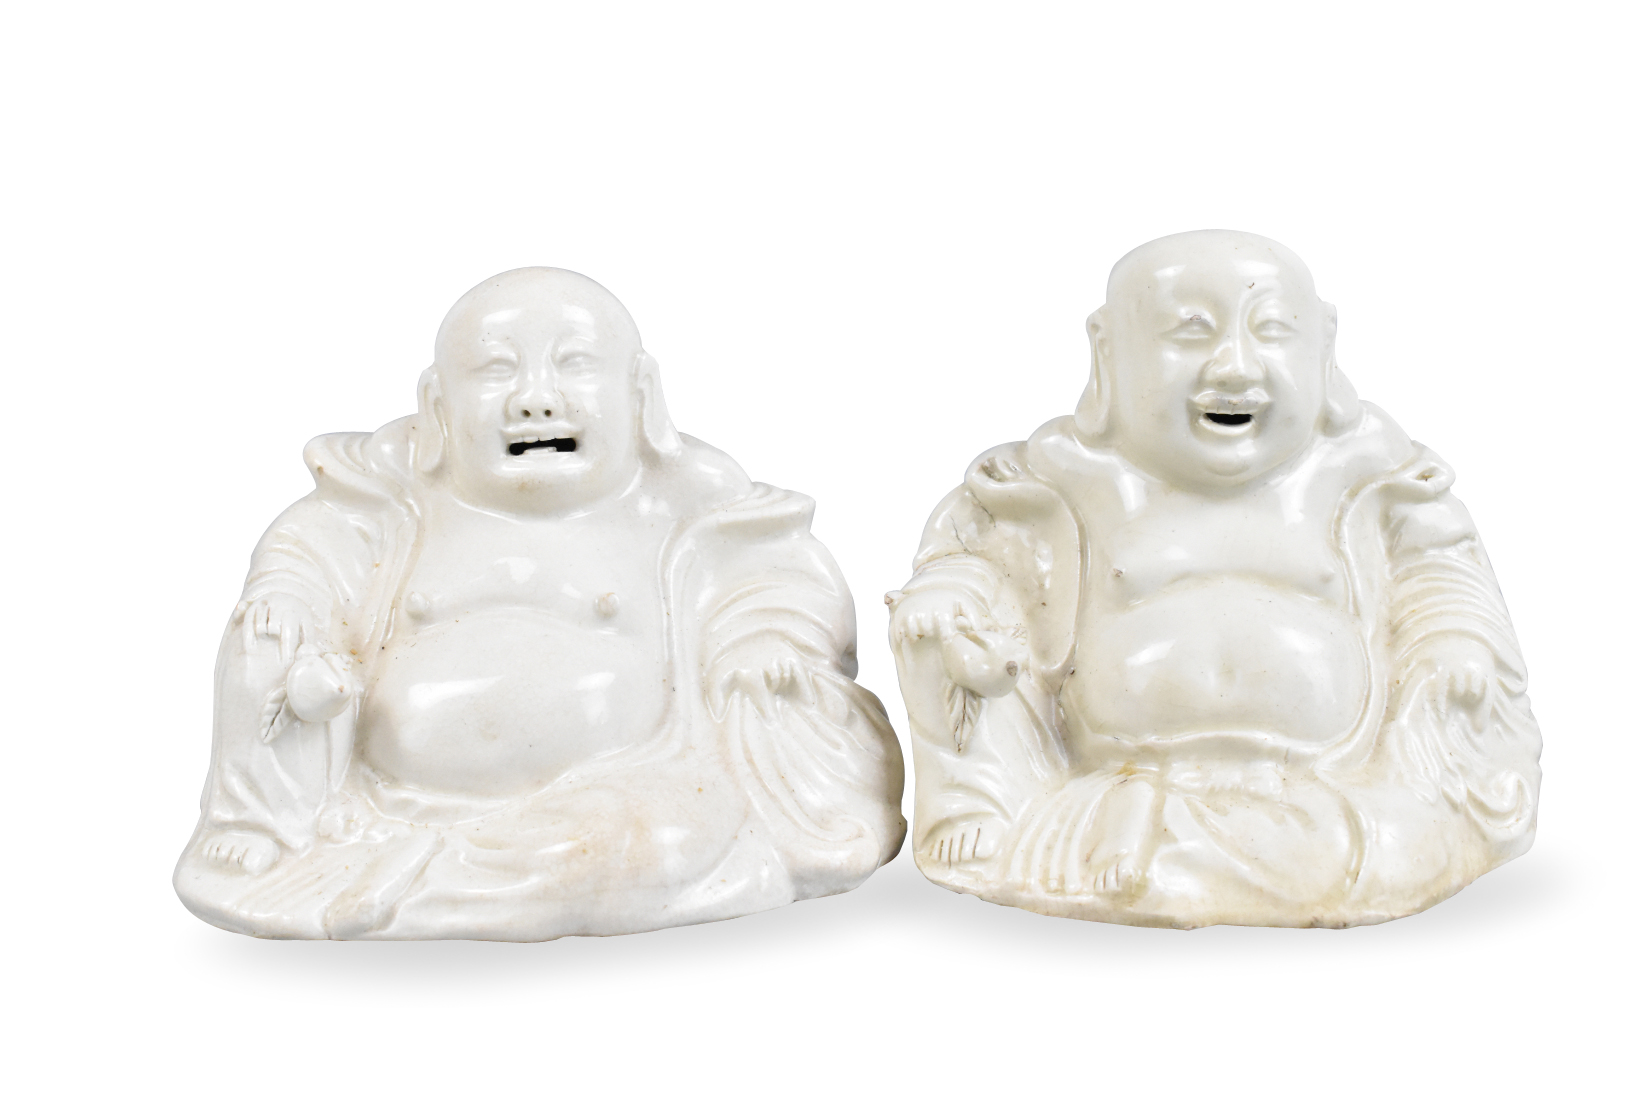 PAIR OF CHINESE GE GLAZED LAUGHING